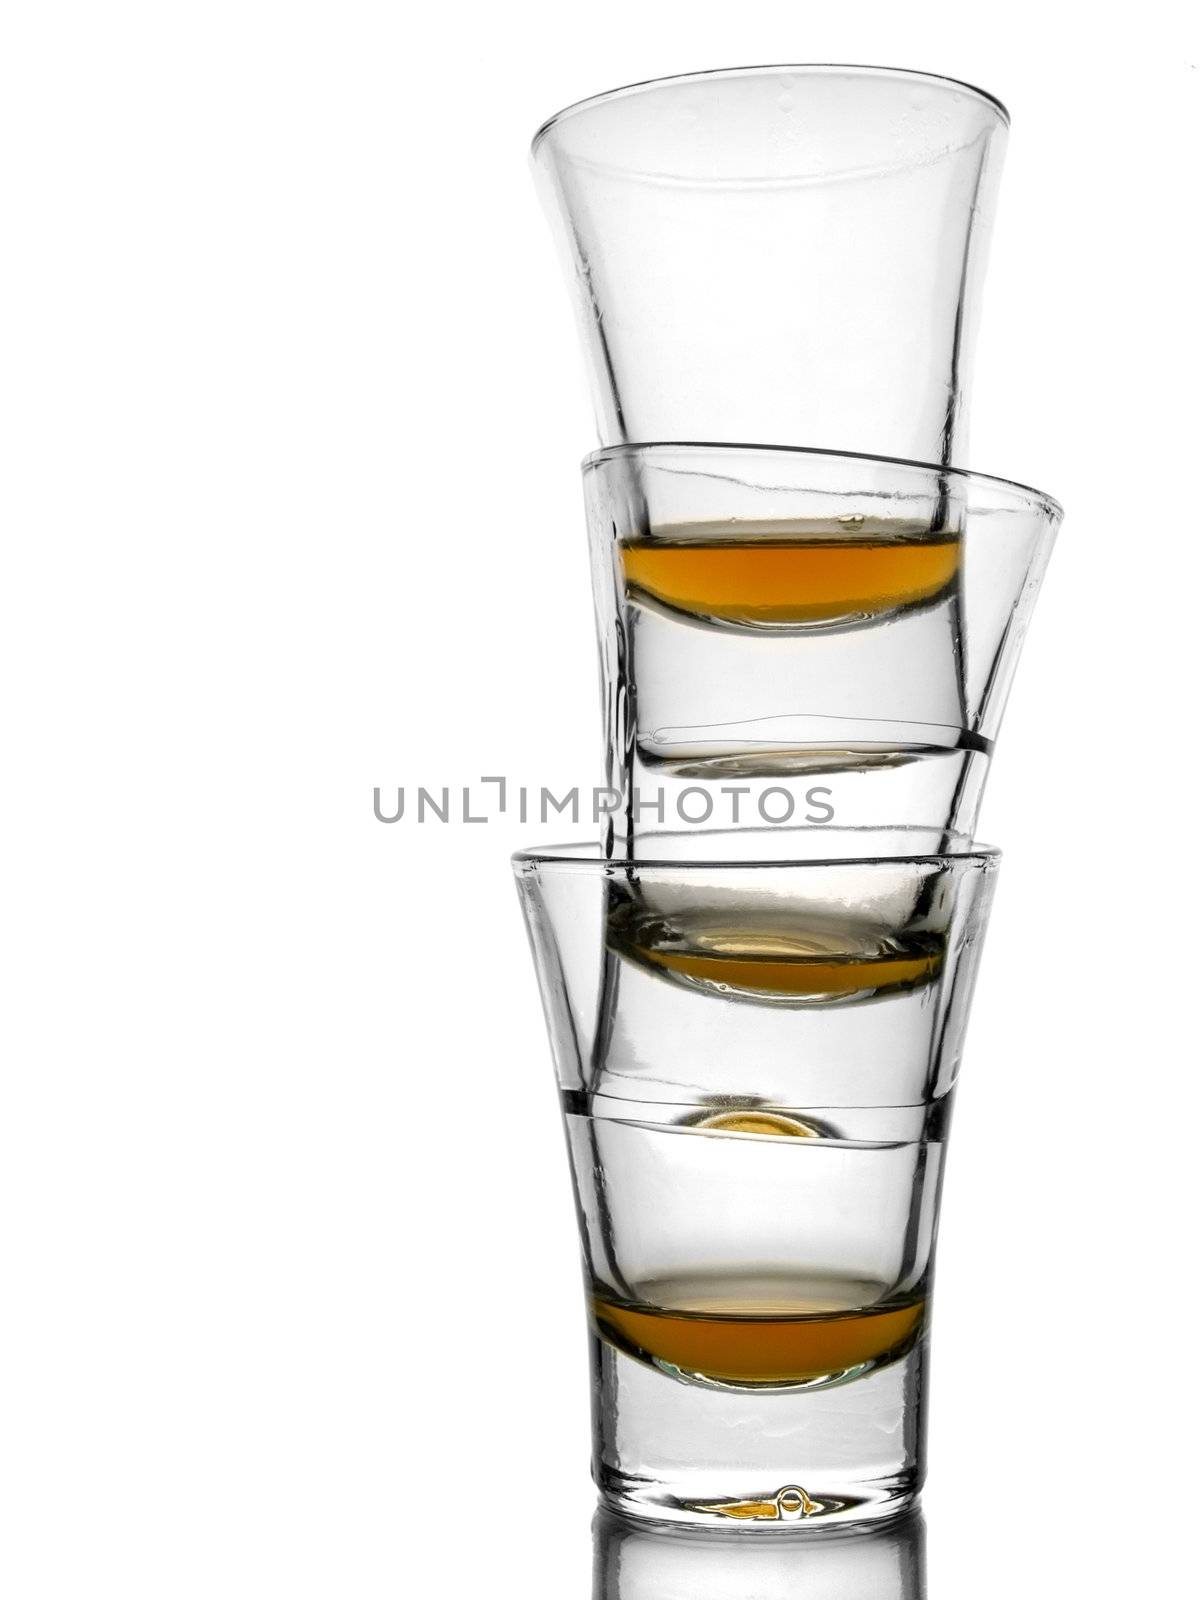 A pile of three almost empty shots of whisky on white background with reflex.